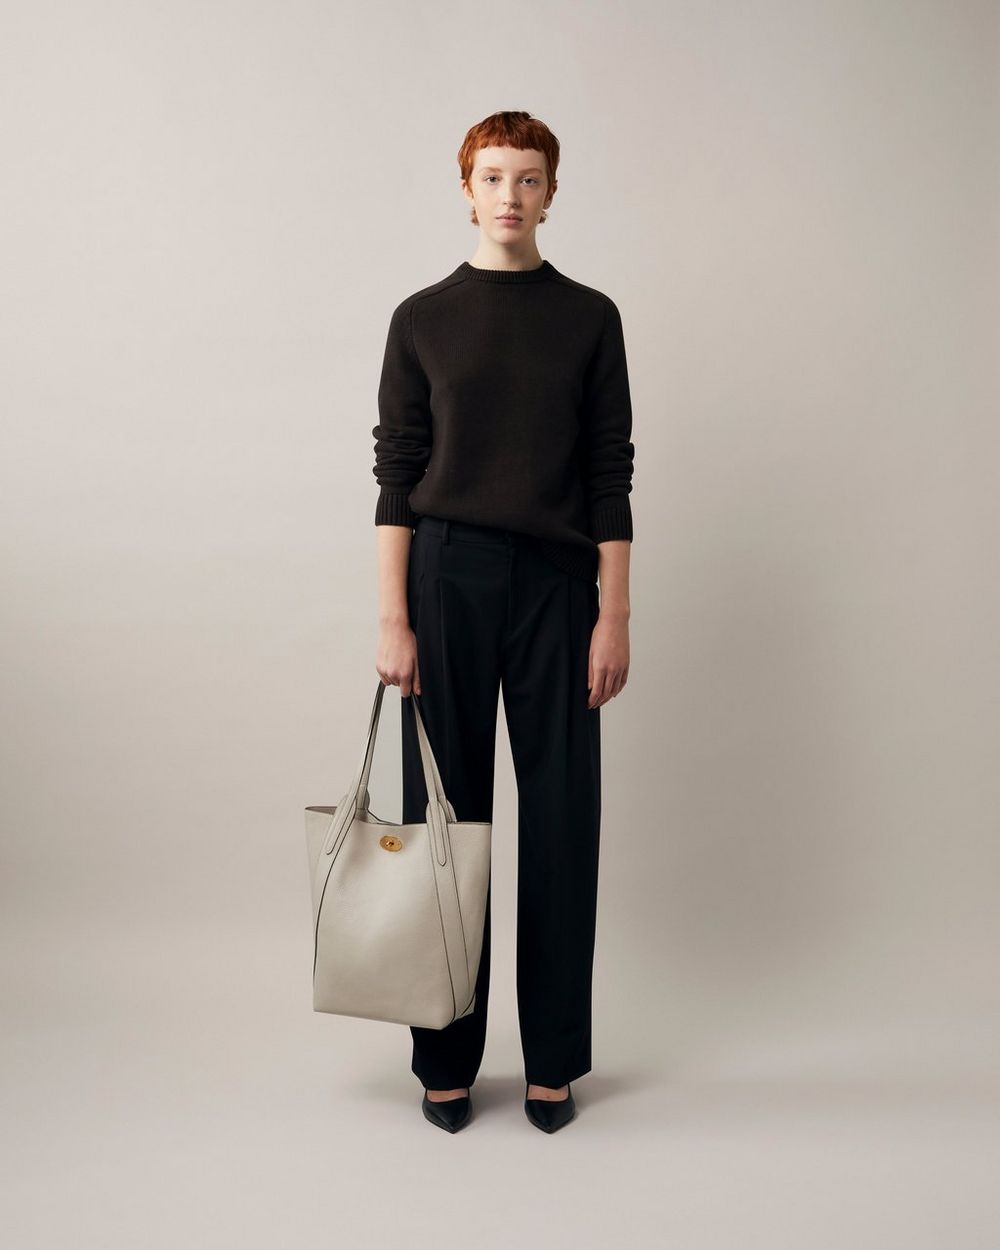 North South Bayswater Tote | Chalk Heavy Grain | Women | Mulberry